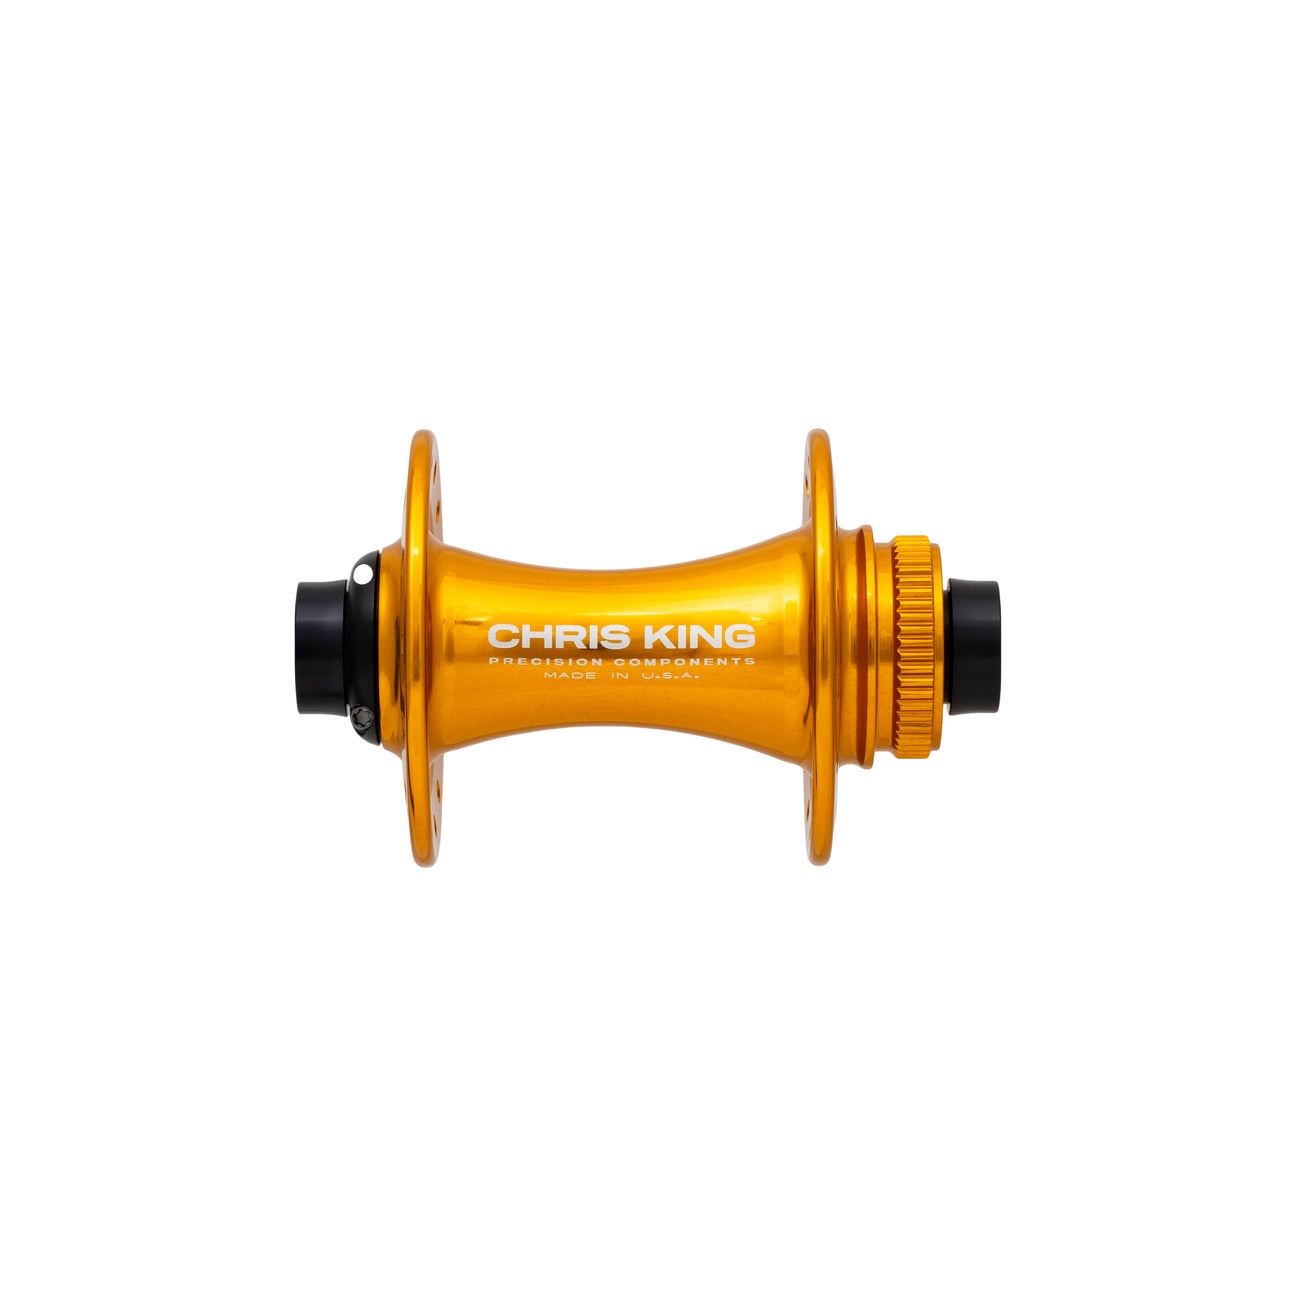 Chris King boost front hub in gold